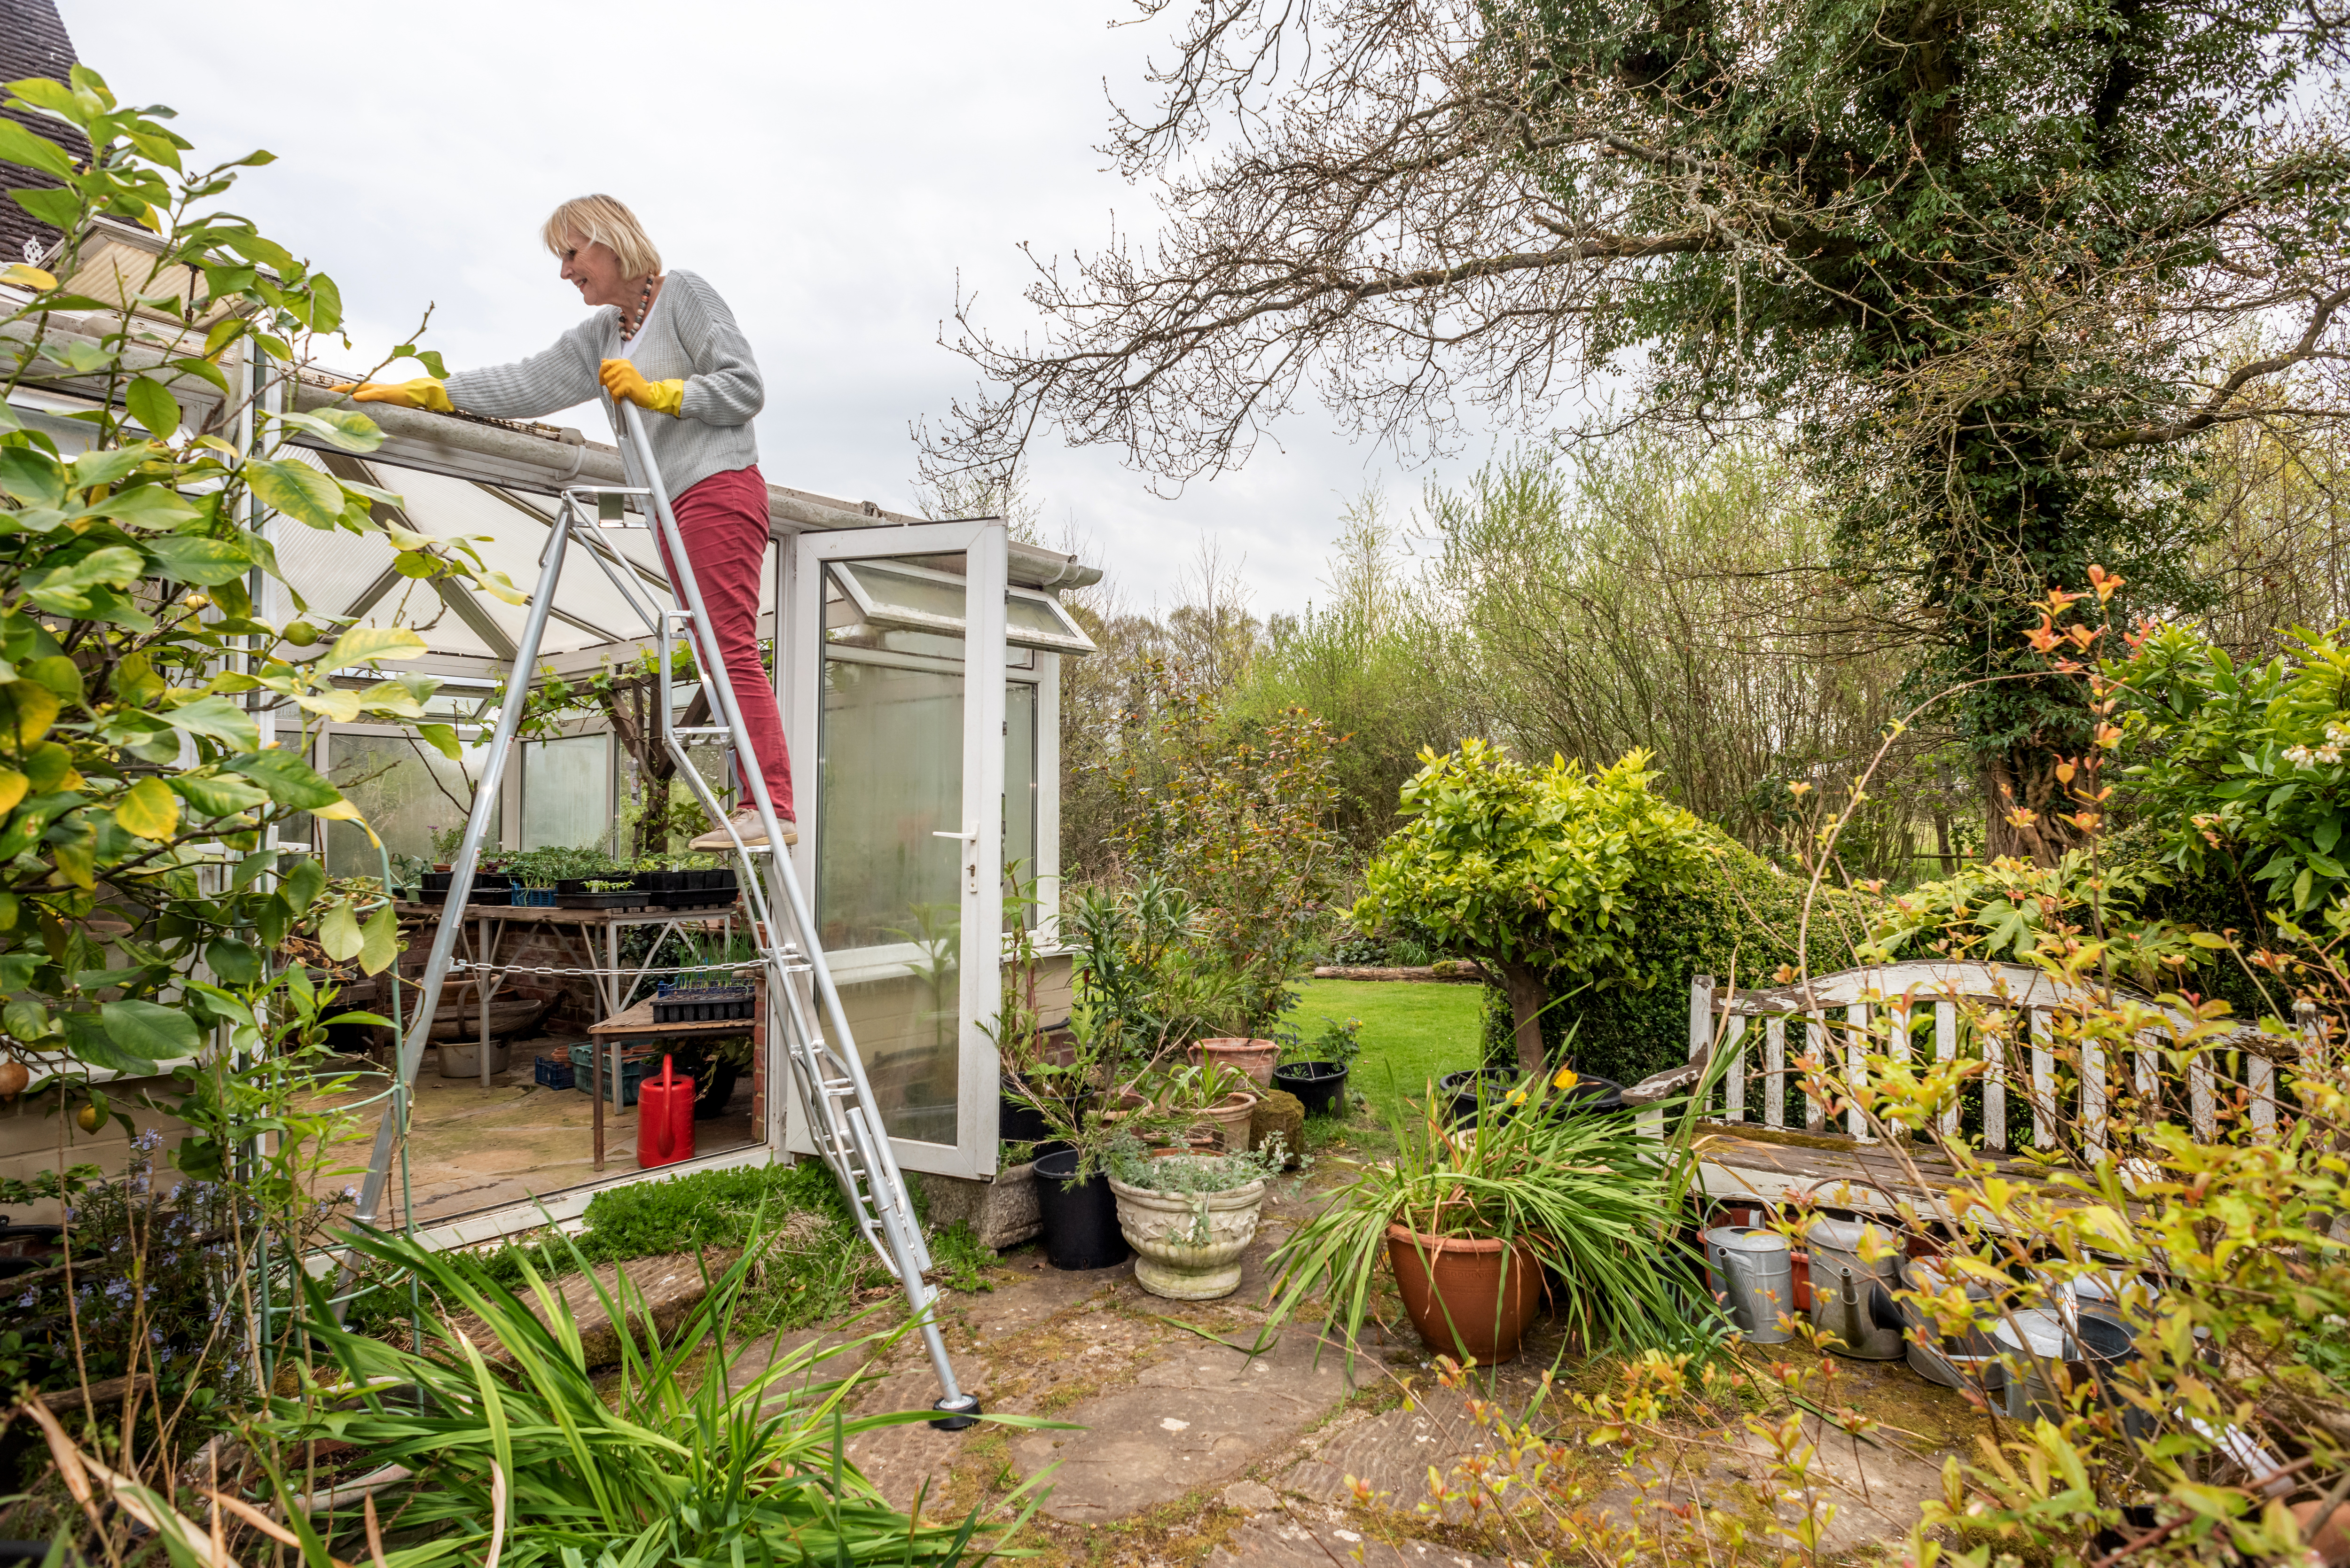 Standing on a tripod to wipe a greenhouse roof